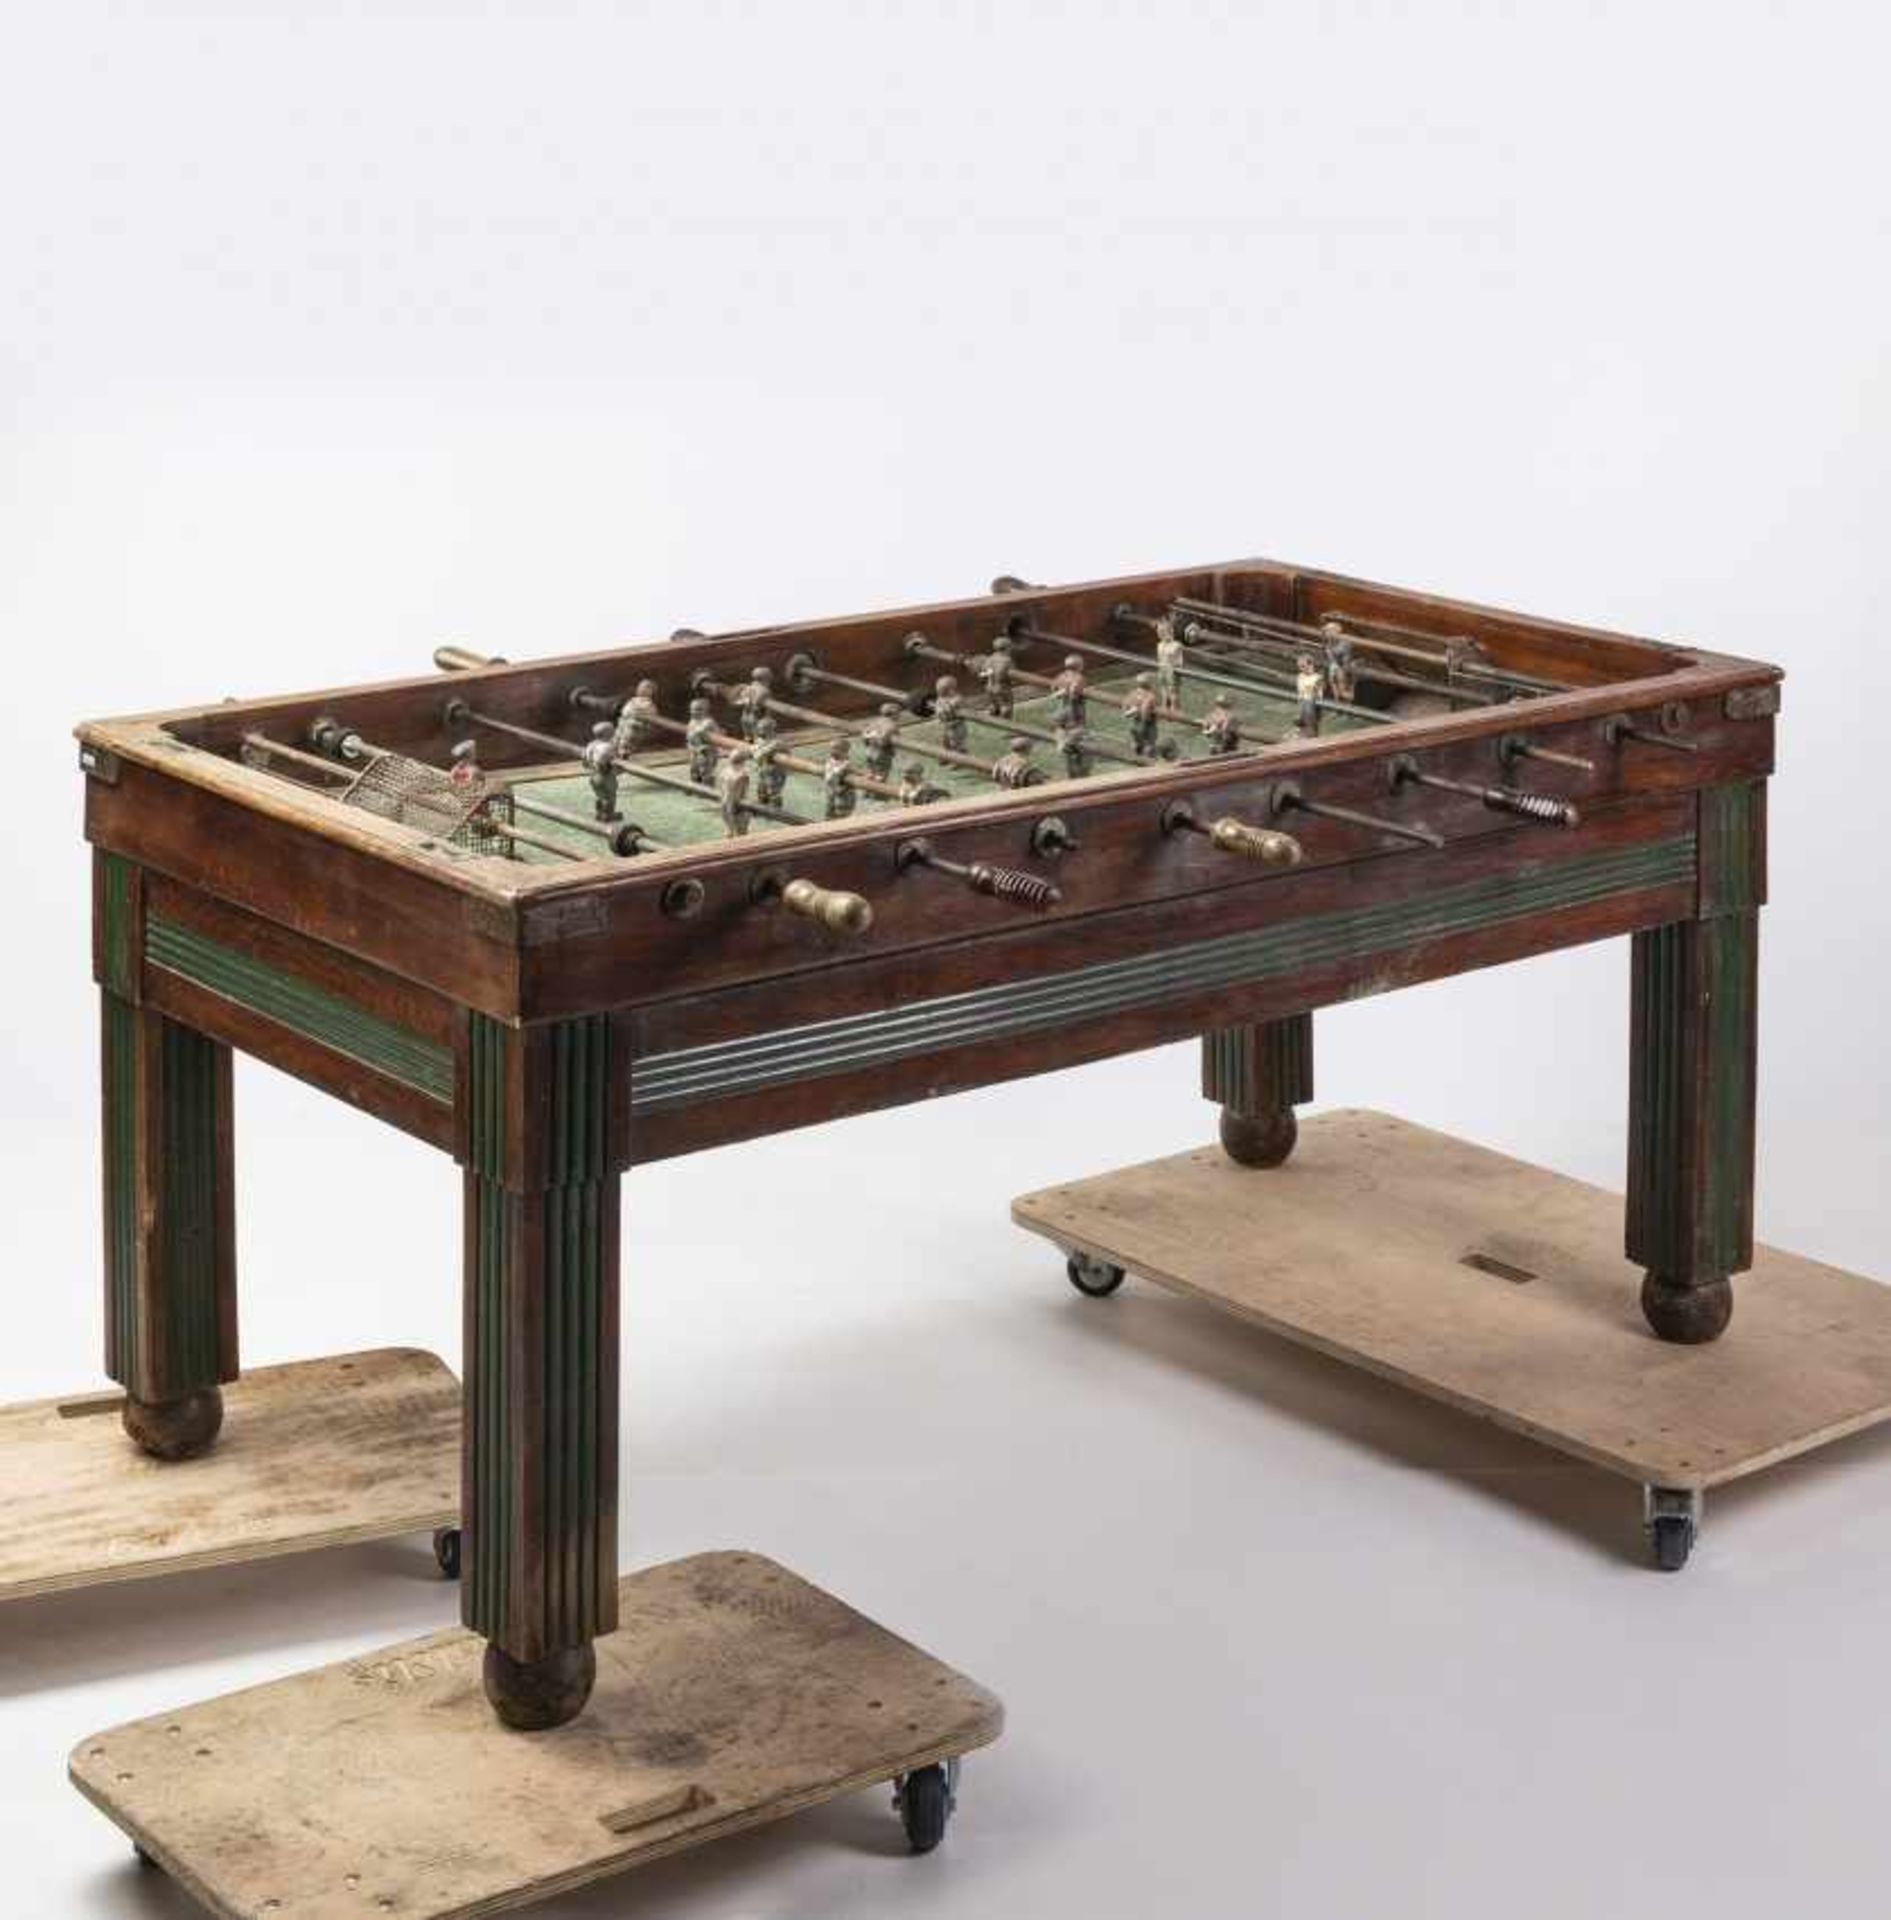 Spanish table football in wood and metal, circa 1940Spanish table football in wood and metal, - Bild 3 aus 5